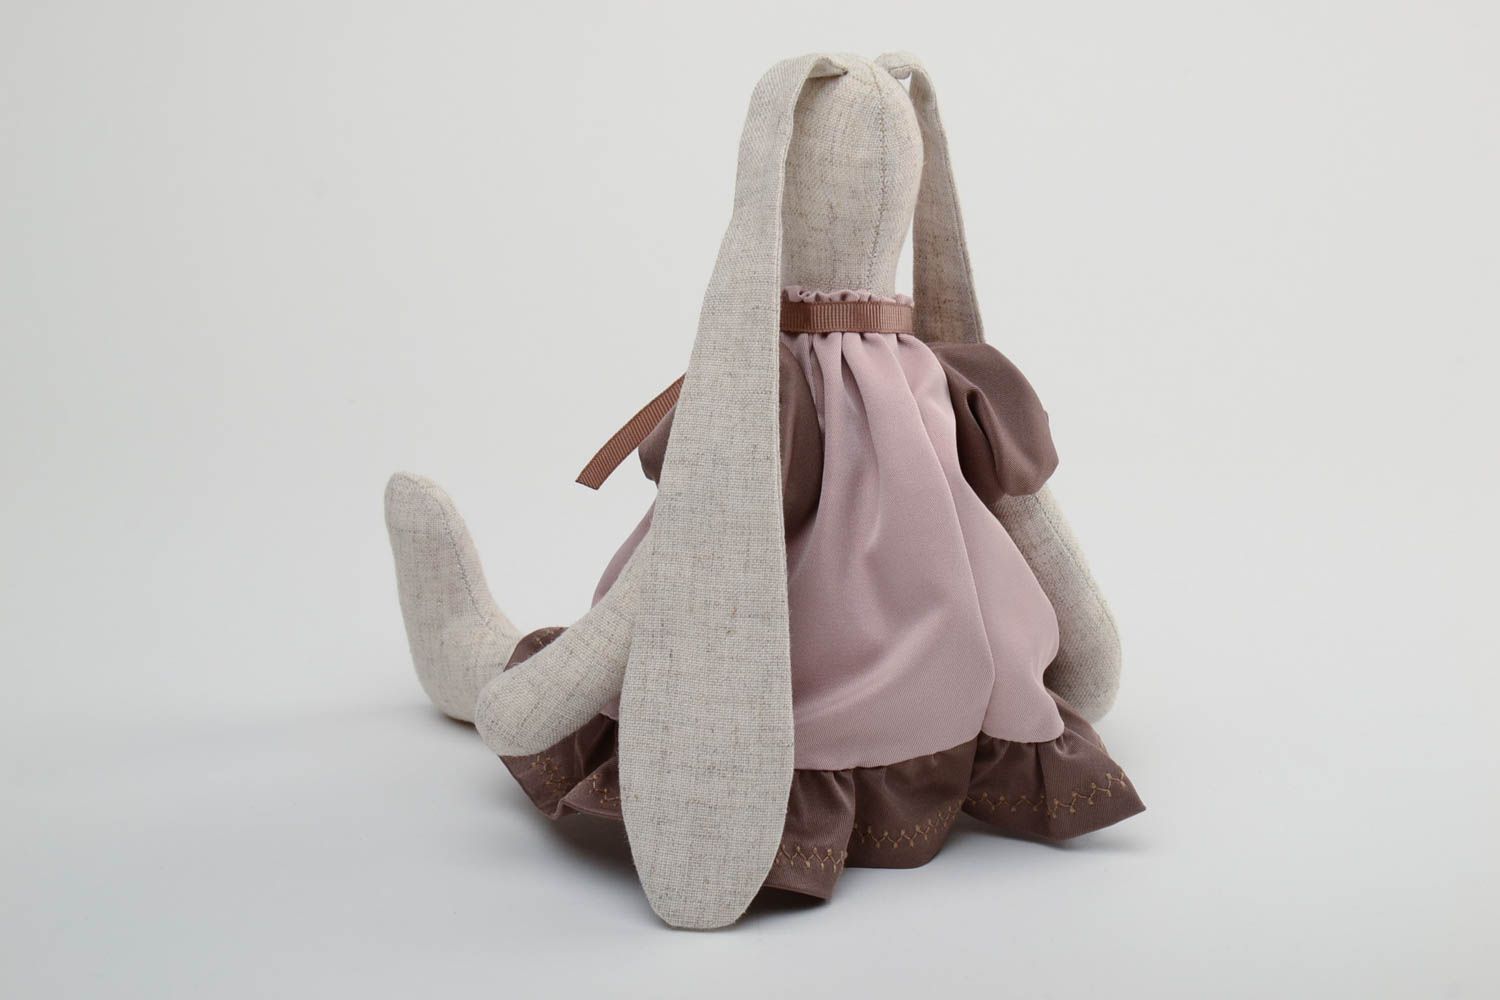 Handmade designer small fabric soft toy rabbit with long ears in dress for kids photo 4